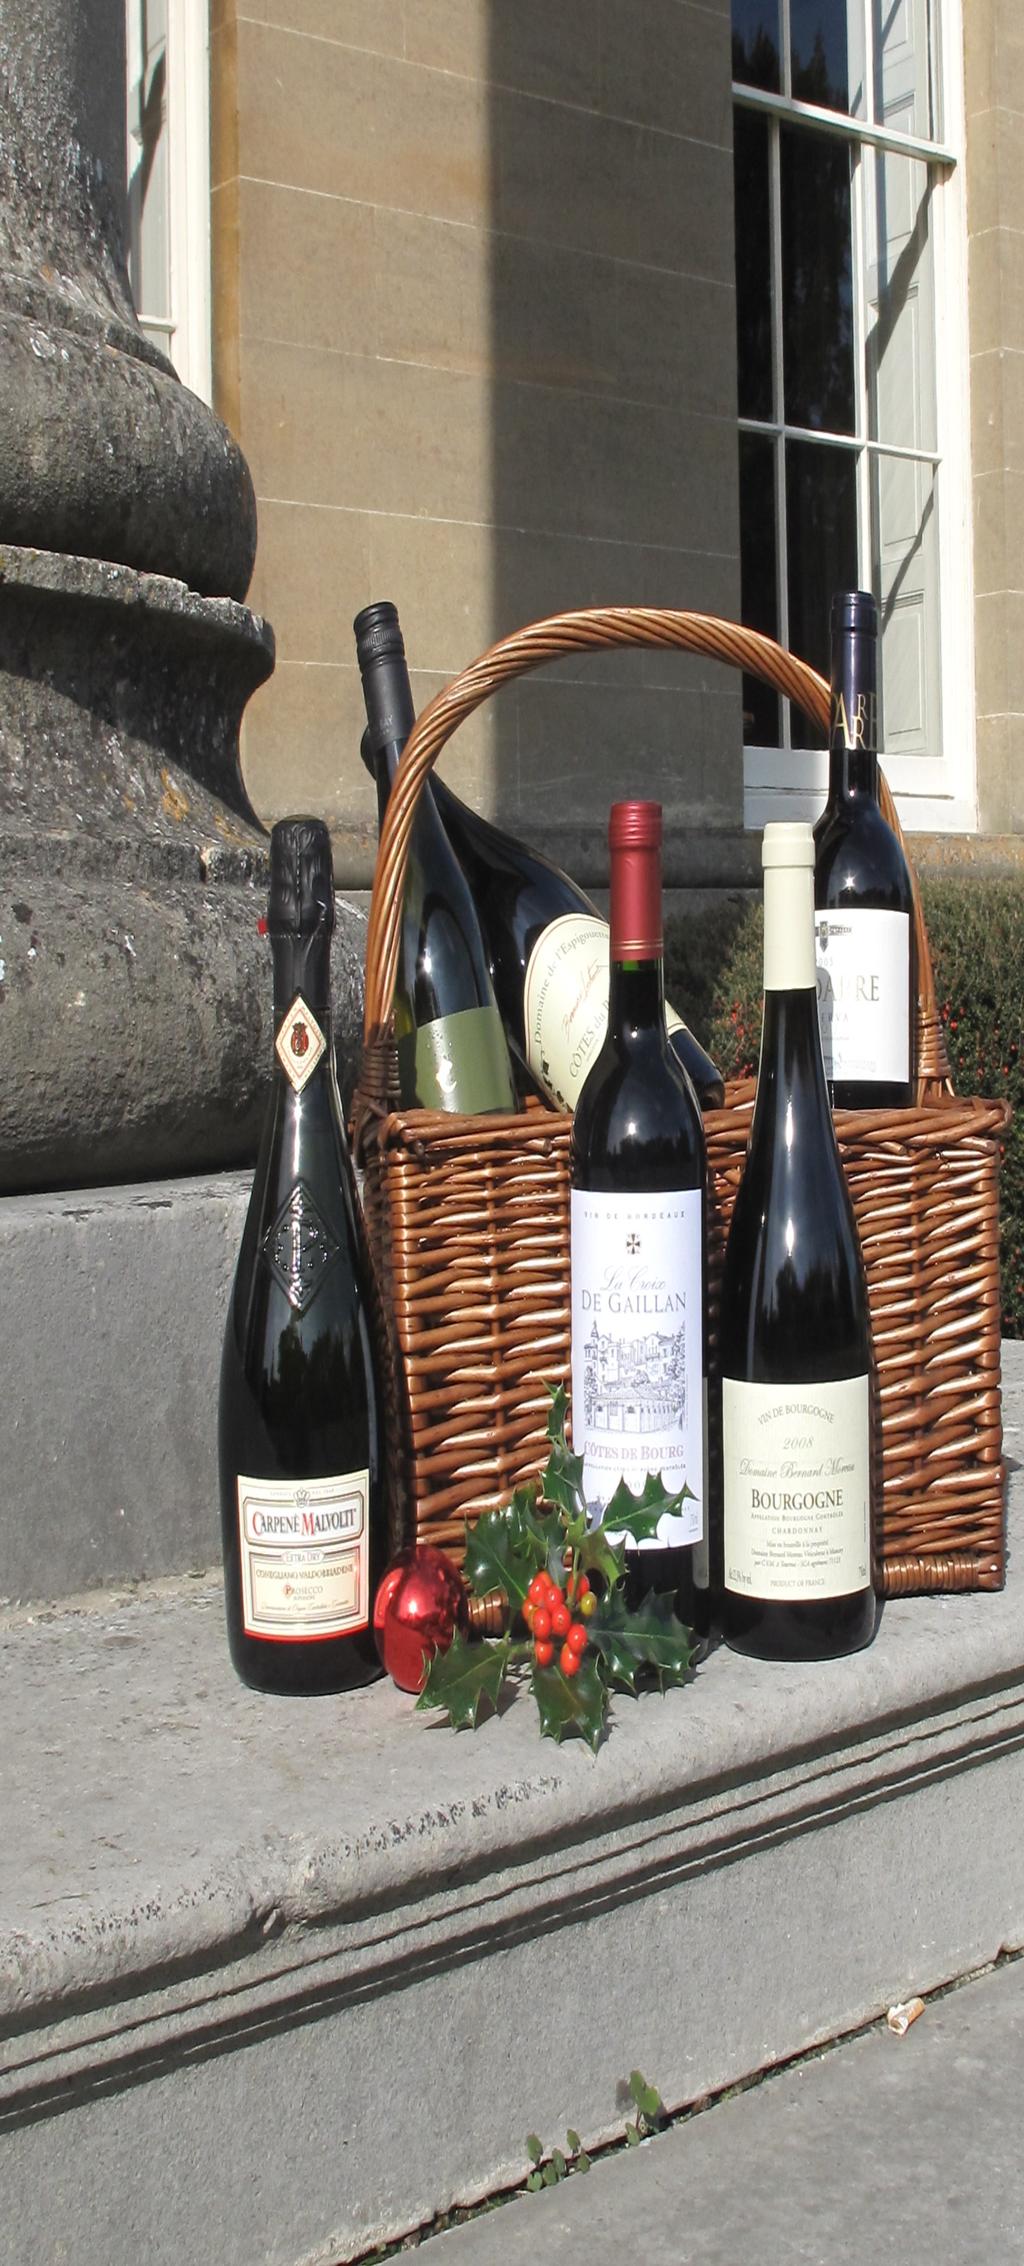 The Essential Christmas Basket Six classic wines in an extremely useful six bottle wicker wine basket, delivery included 95.